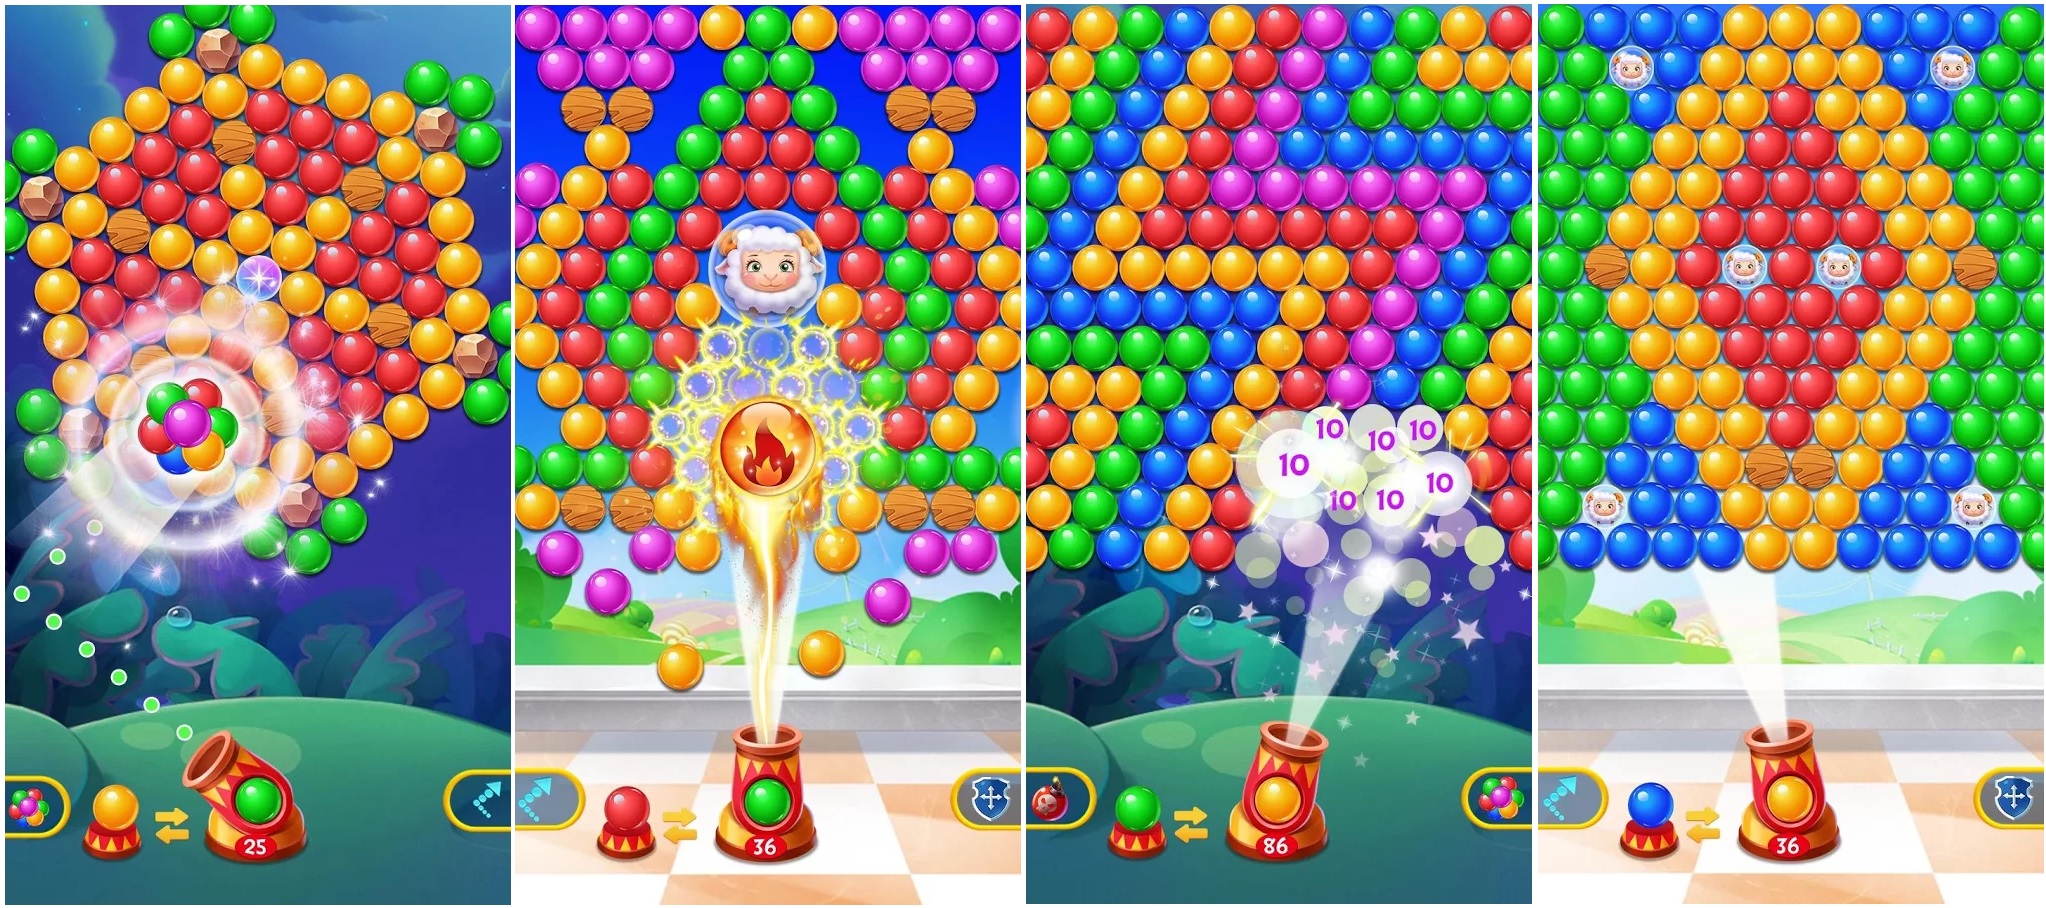 Join in the Fun with Bubble Shooter